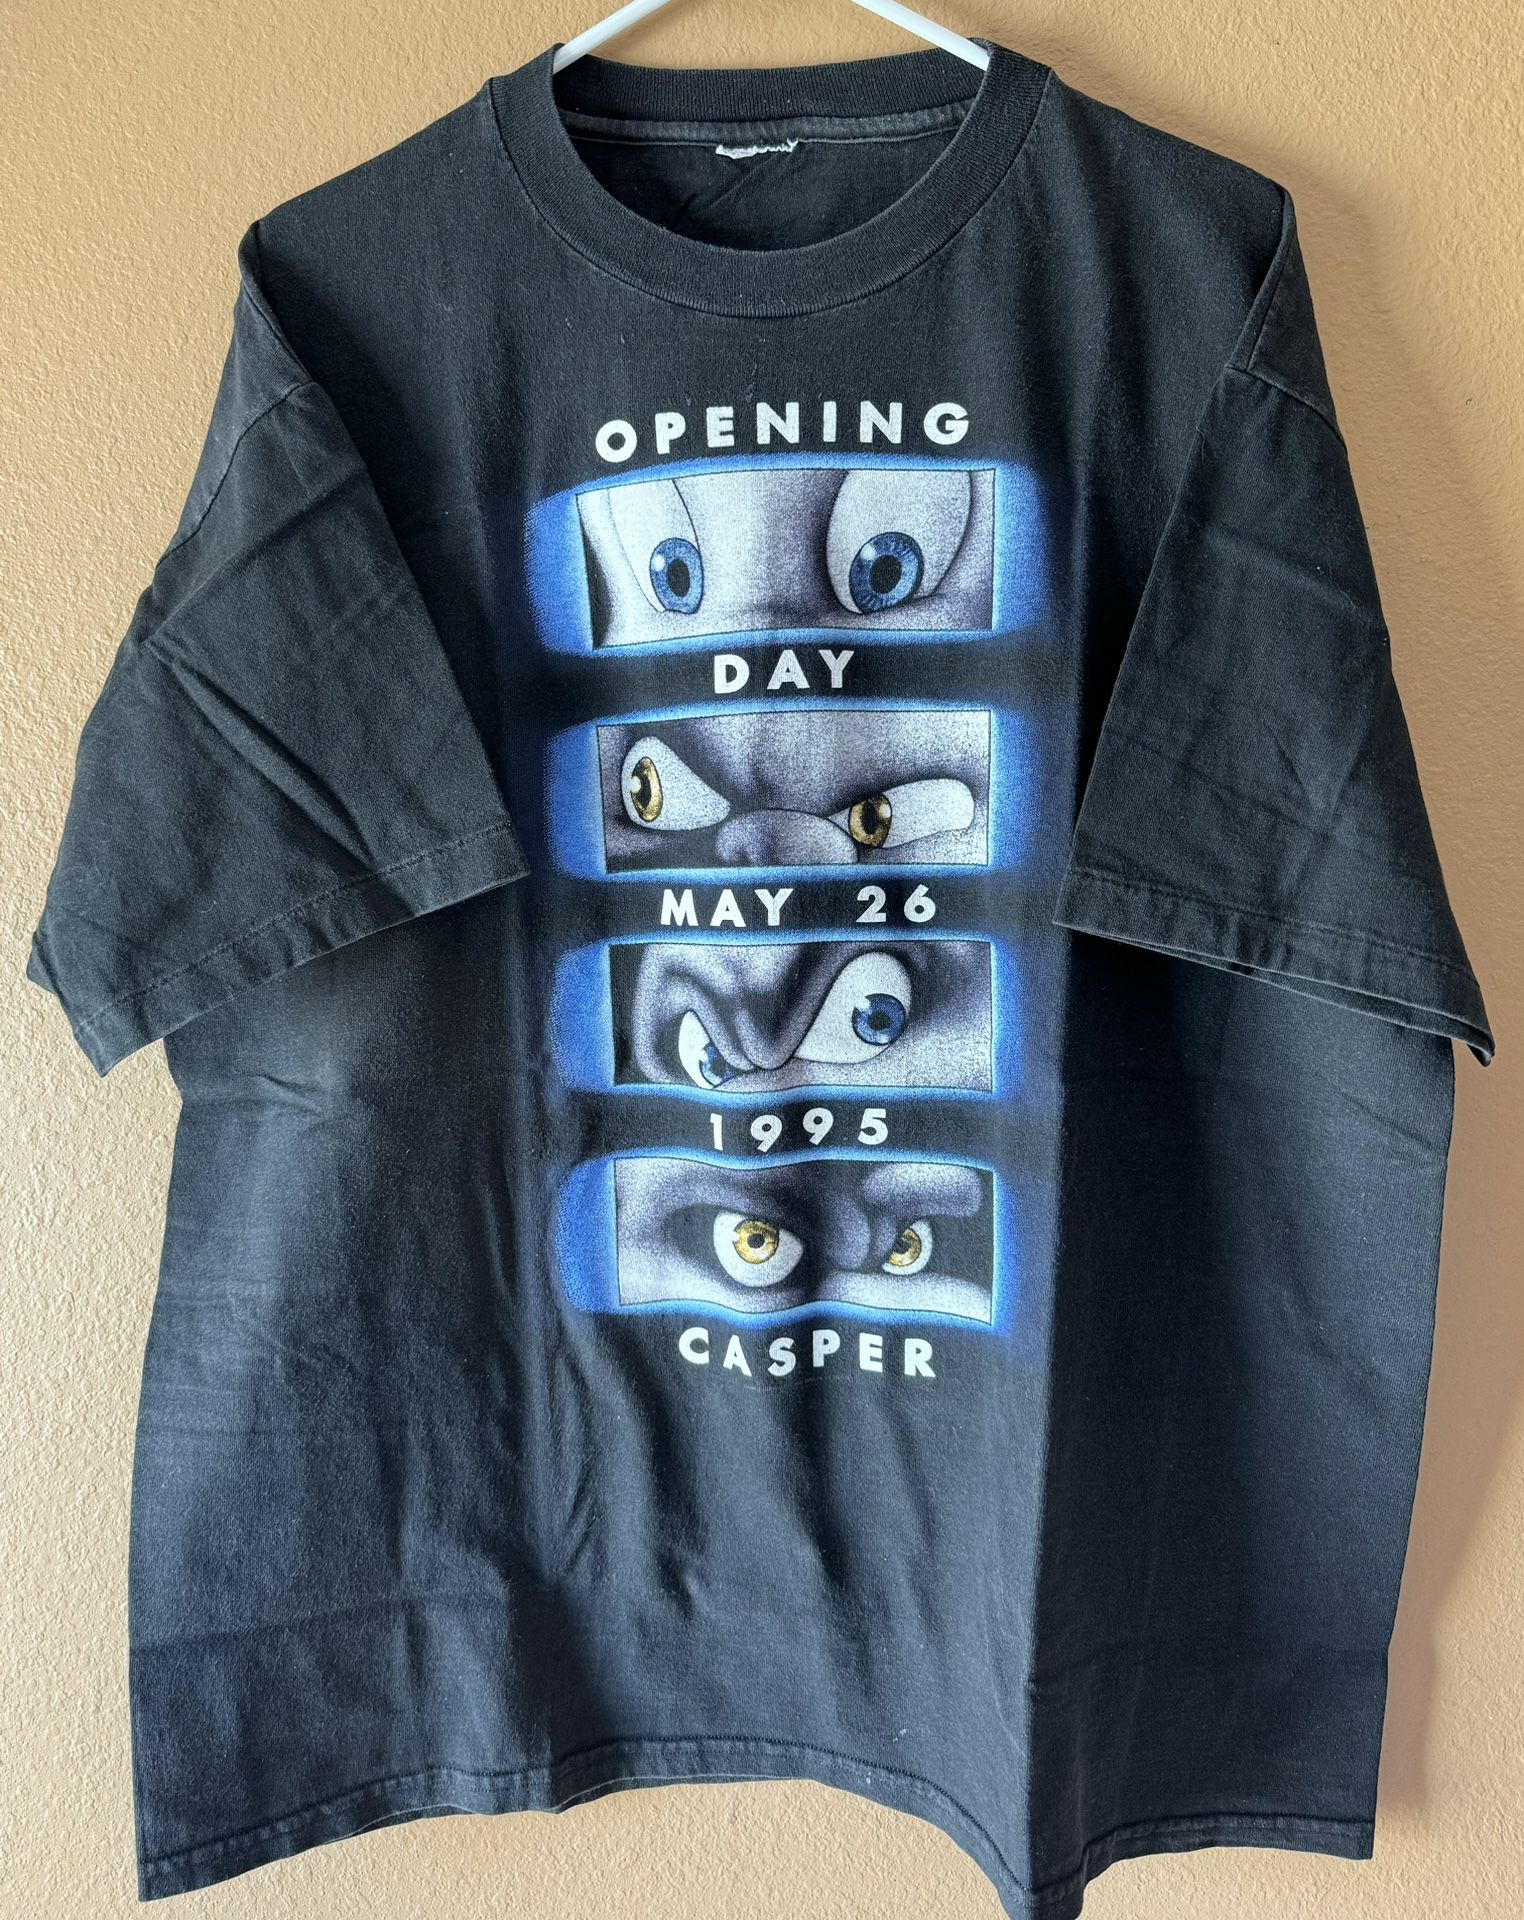 Casper 1995 Opening Day Movie Promo Rare Vintage T-Shirt Cut Tag Size XL